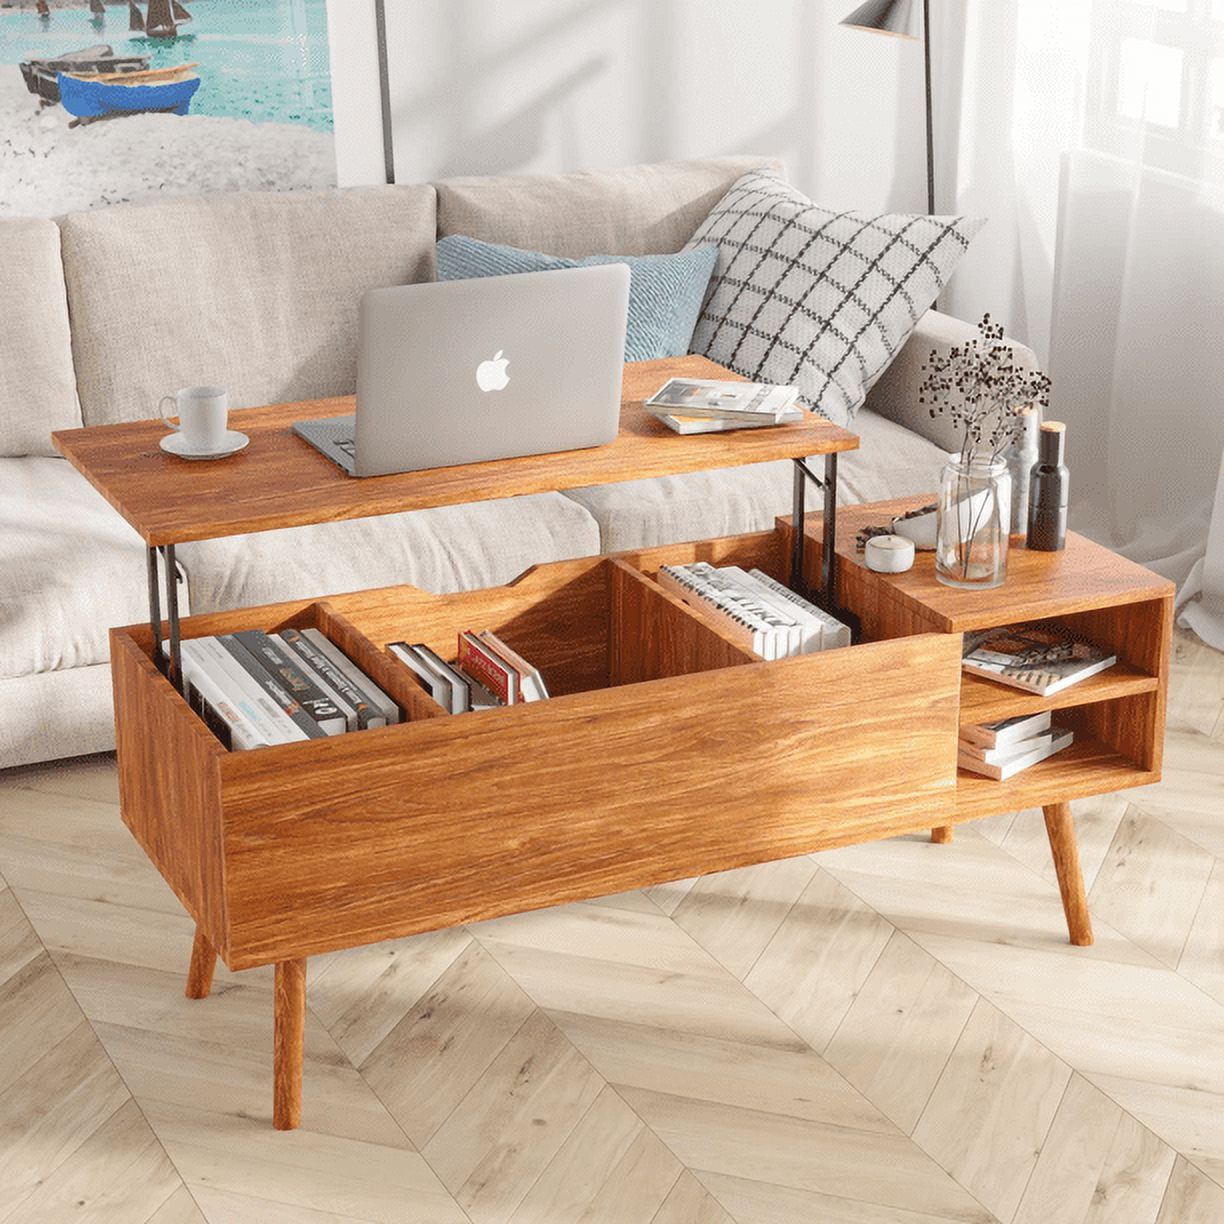 Modern Lift Top Coffee Table With Hidden Compartment Storage,Adjustable  Wood Table For Living Room,Brown – Walmart Inside Lift Top Coffee Tables With Shelves (Photo 2 of 15)